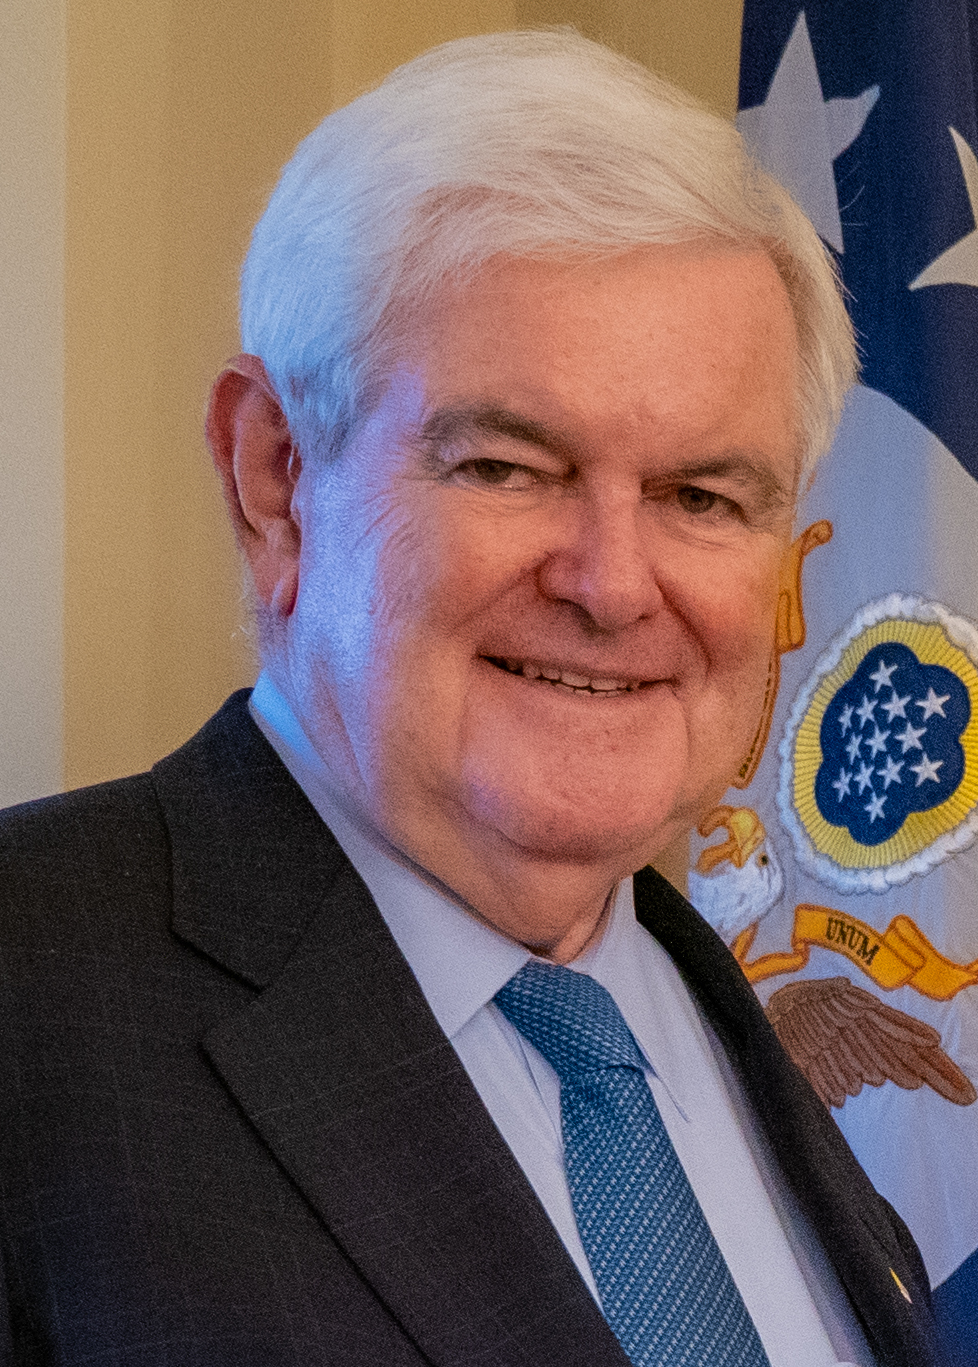 Newt Gingrich as Ambassador to Italy in 2019